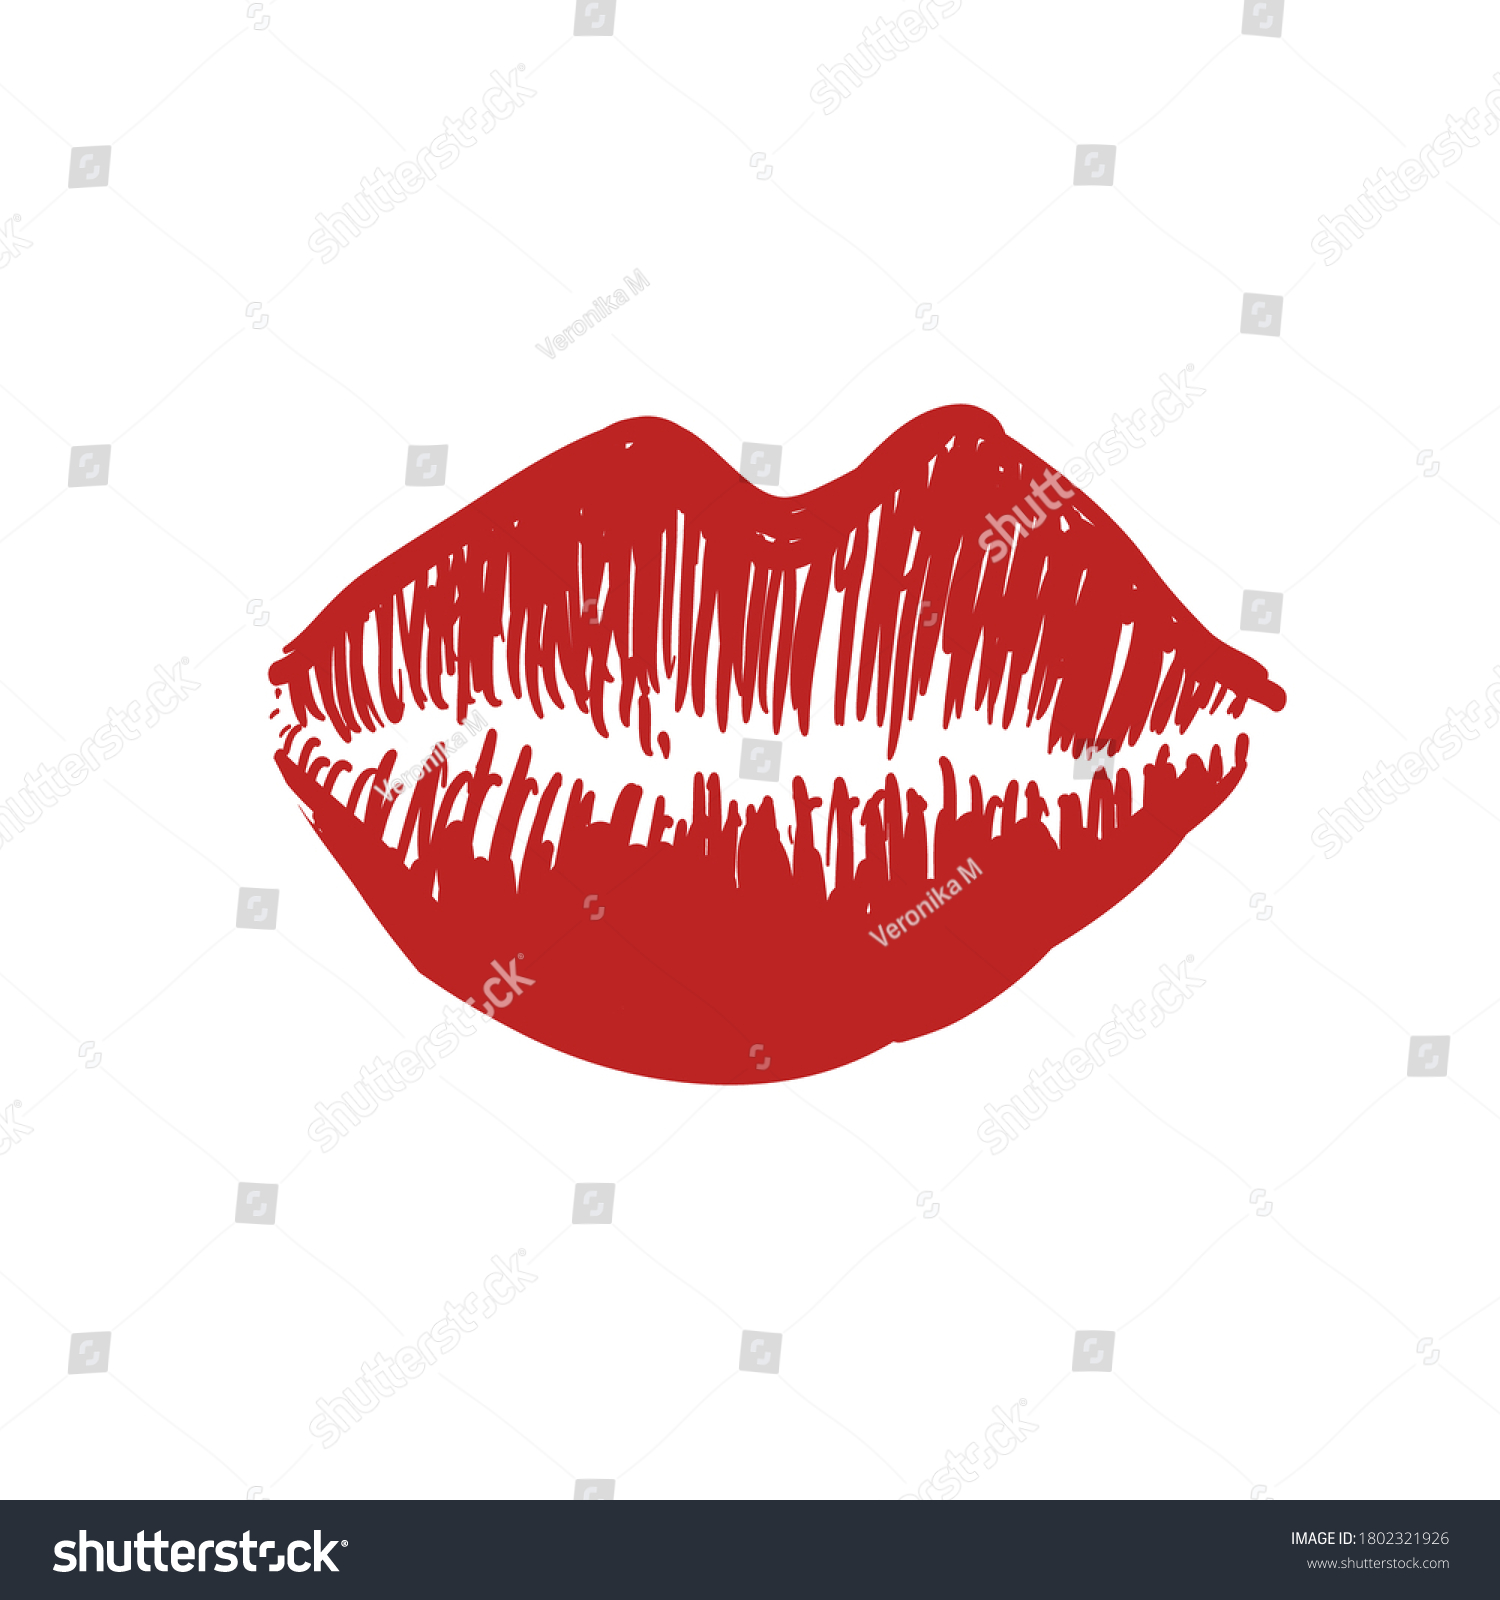 Sexy Vector Female Lips Illustration Can Stock Vector Royalty Free Shutterstock